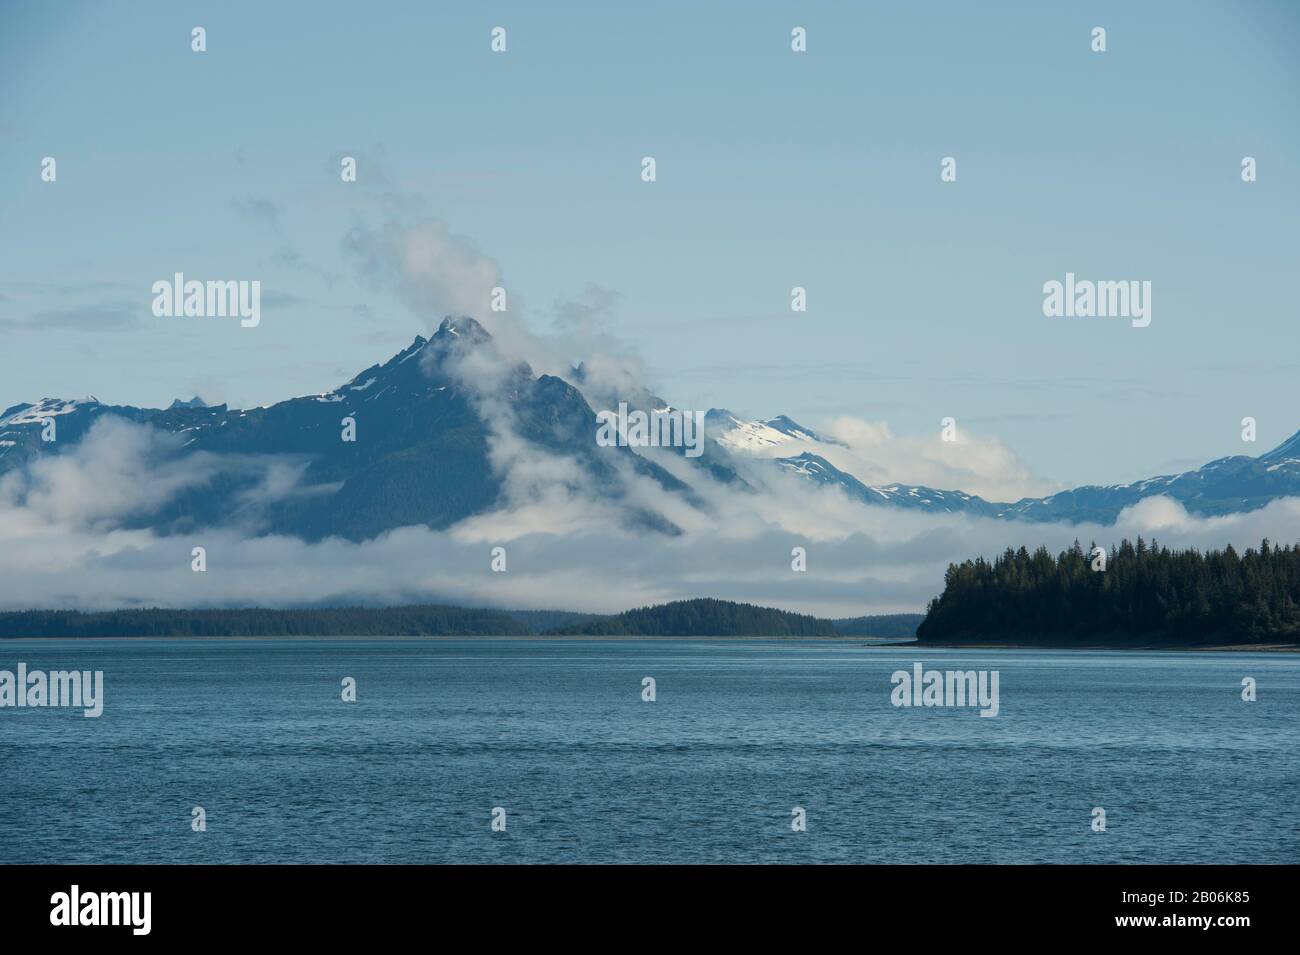 View of mountains with fog clearing at Sitakaday Narrows near Bartlett Cove, Glacier Bay National Park, Alaska, USA Stock Photo